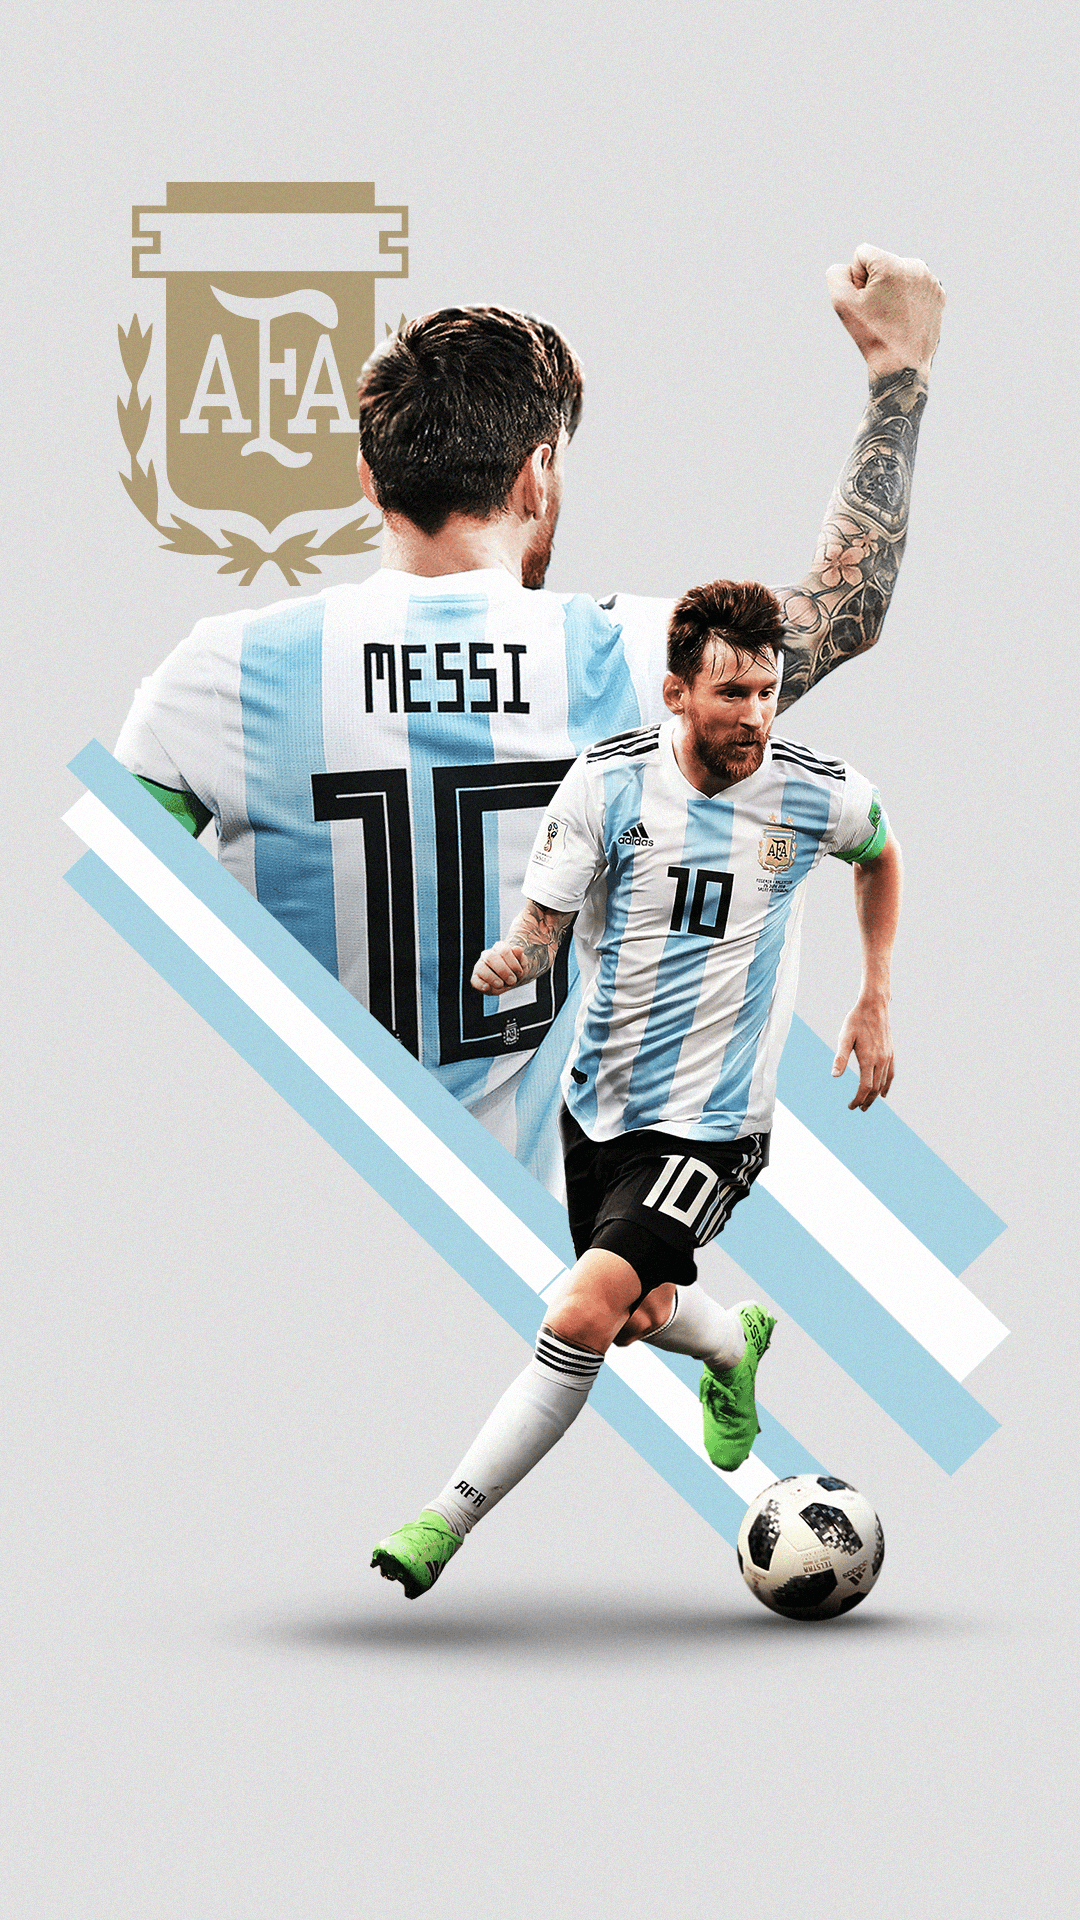 World Cup 2018. Barcelona. Lionel messi